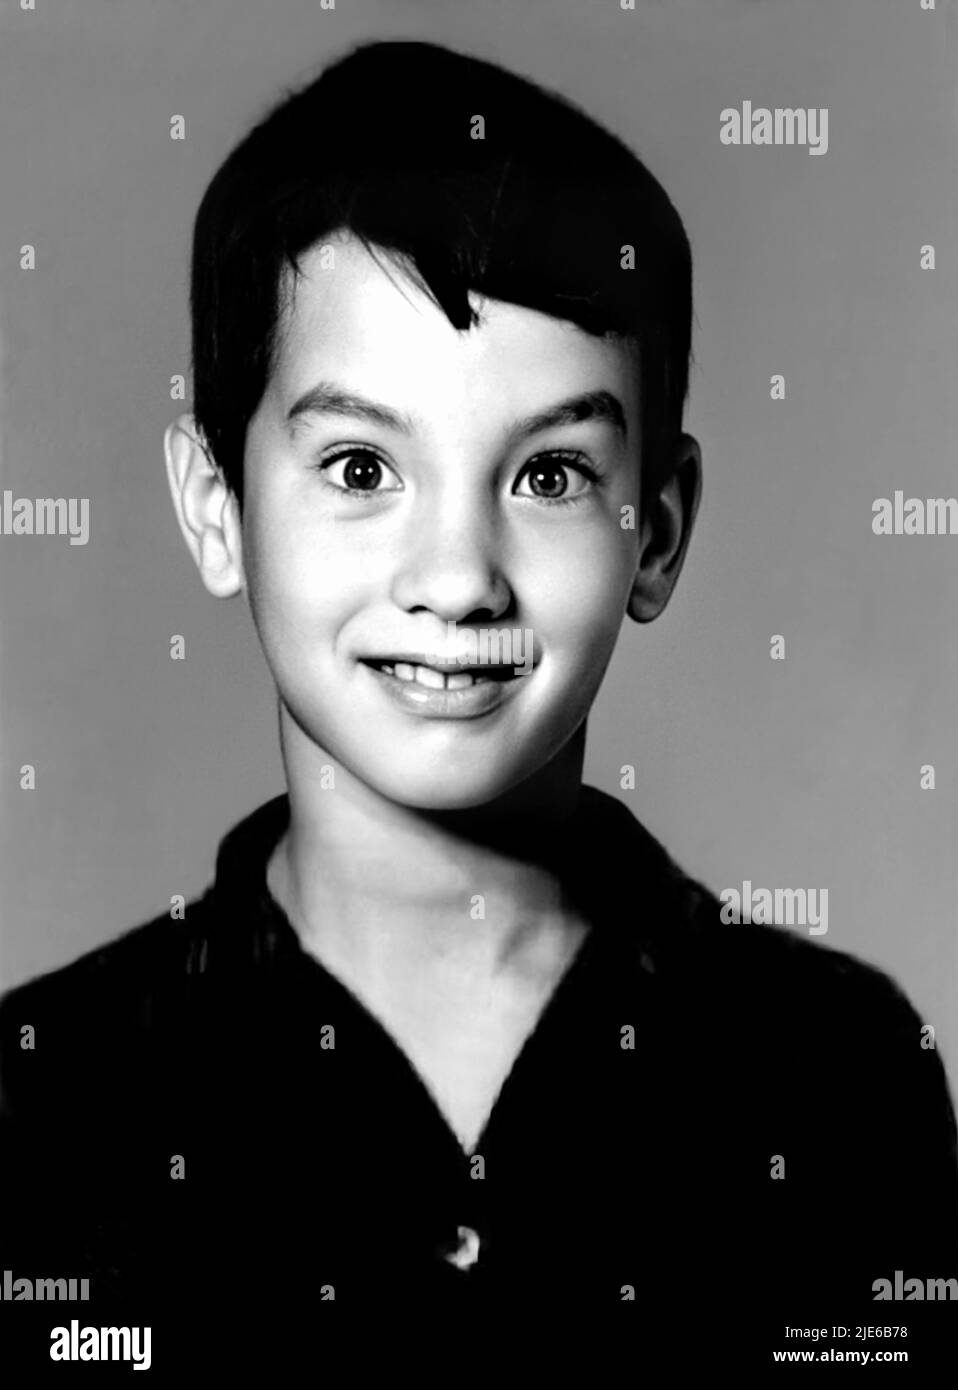 Tom hanks smile Black and White Stock Photos & Images - Alamy